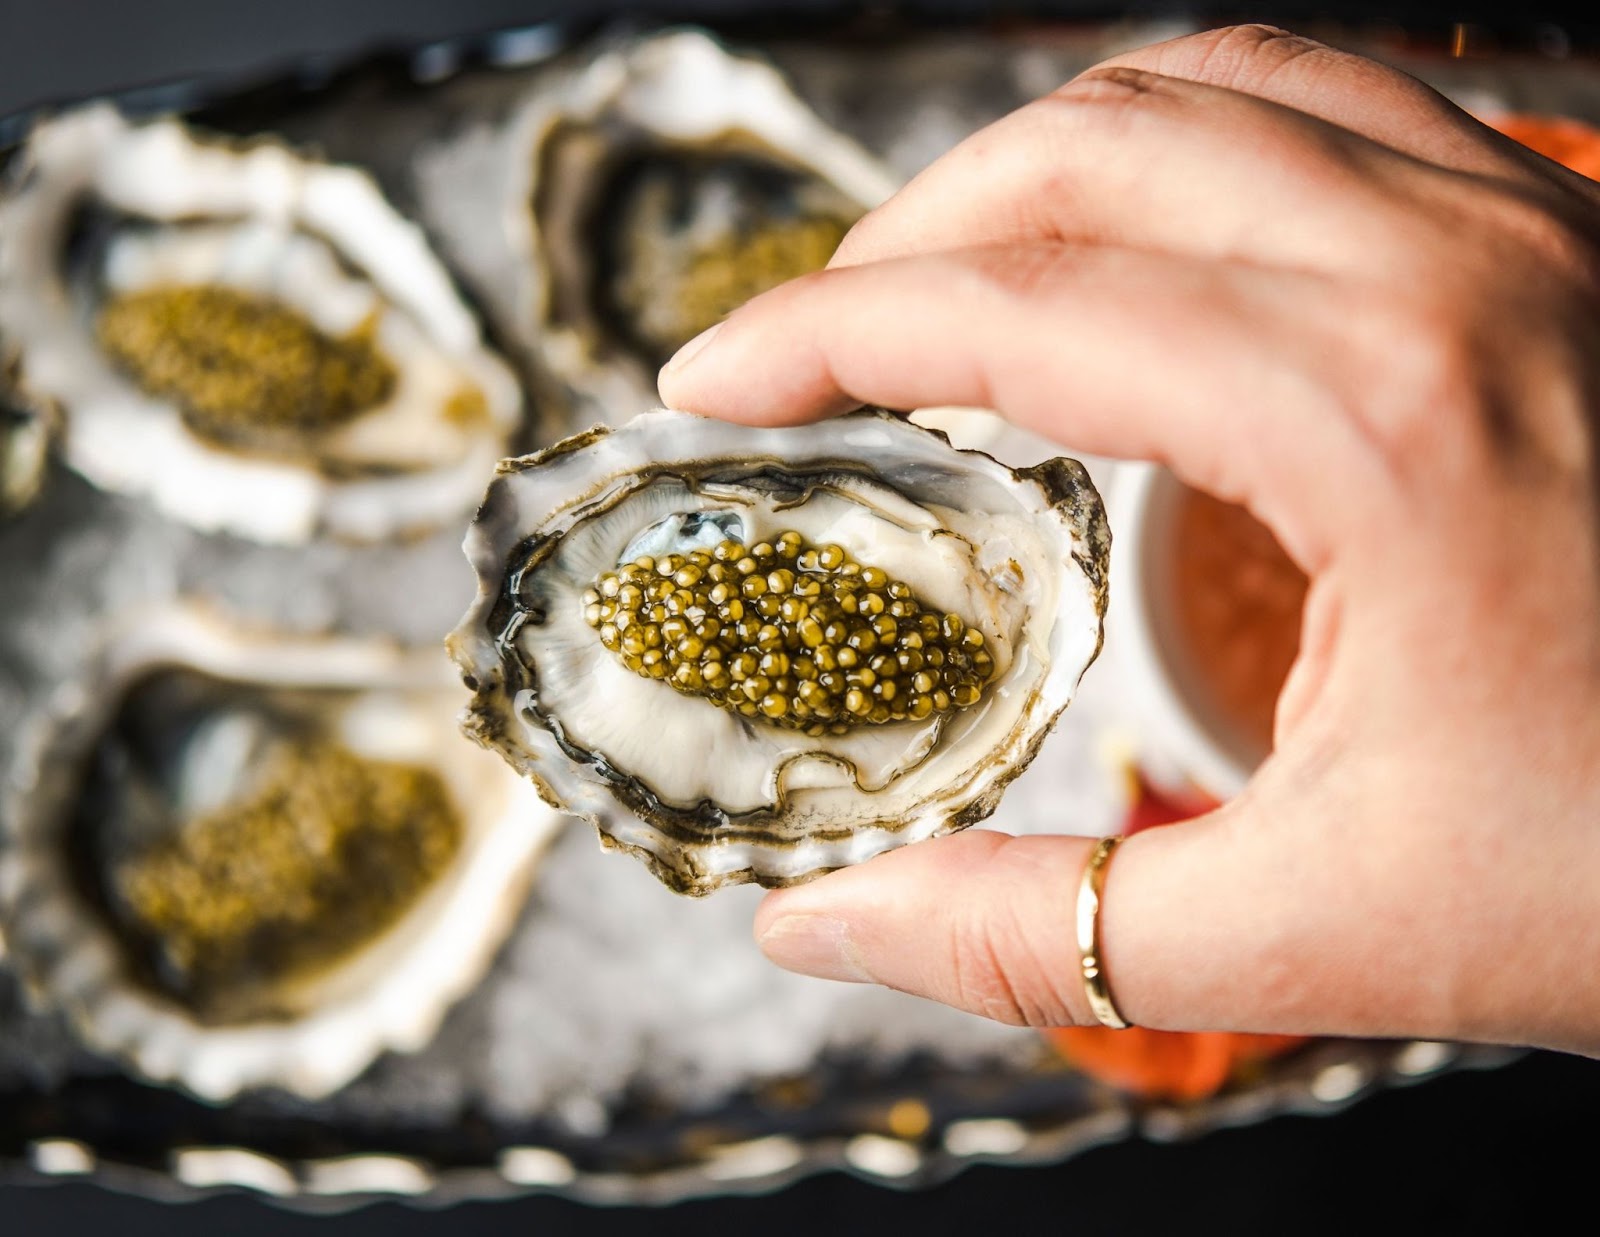 focus is on an oyster topped with caviar, held in an unidentifiable person's hand. Then there's more oysters fuzzy in the background on the plate underneath the hand. The person is wearing a gold ring on their thumb.